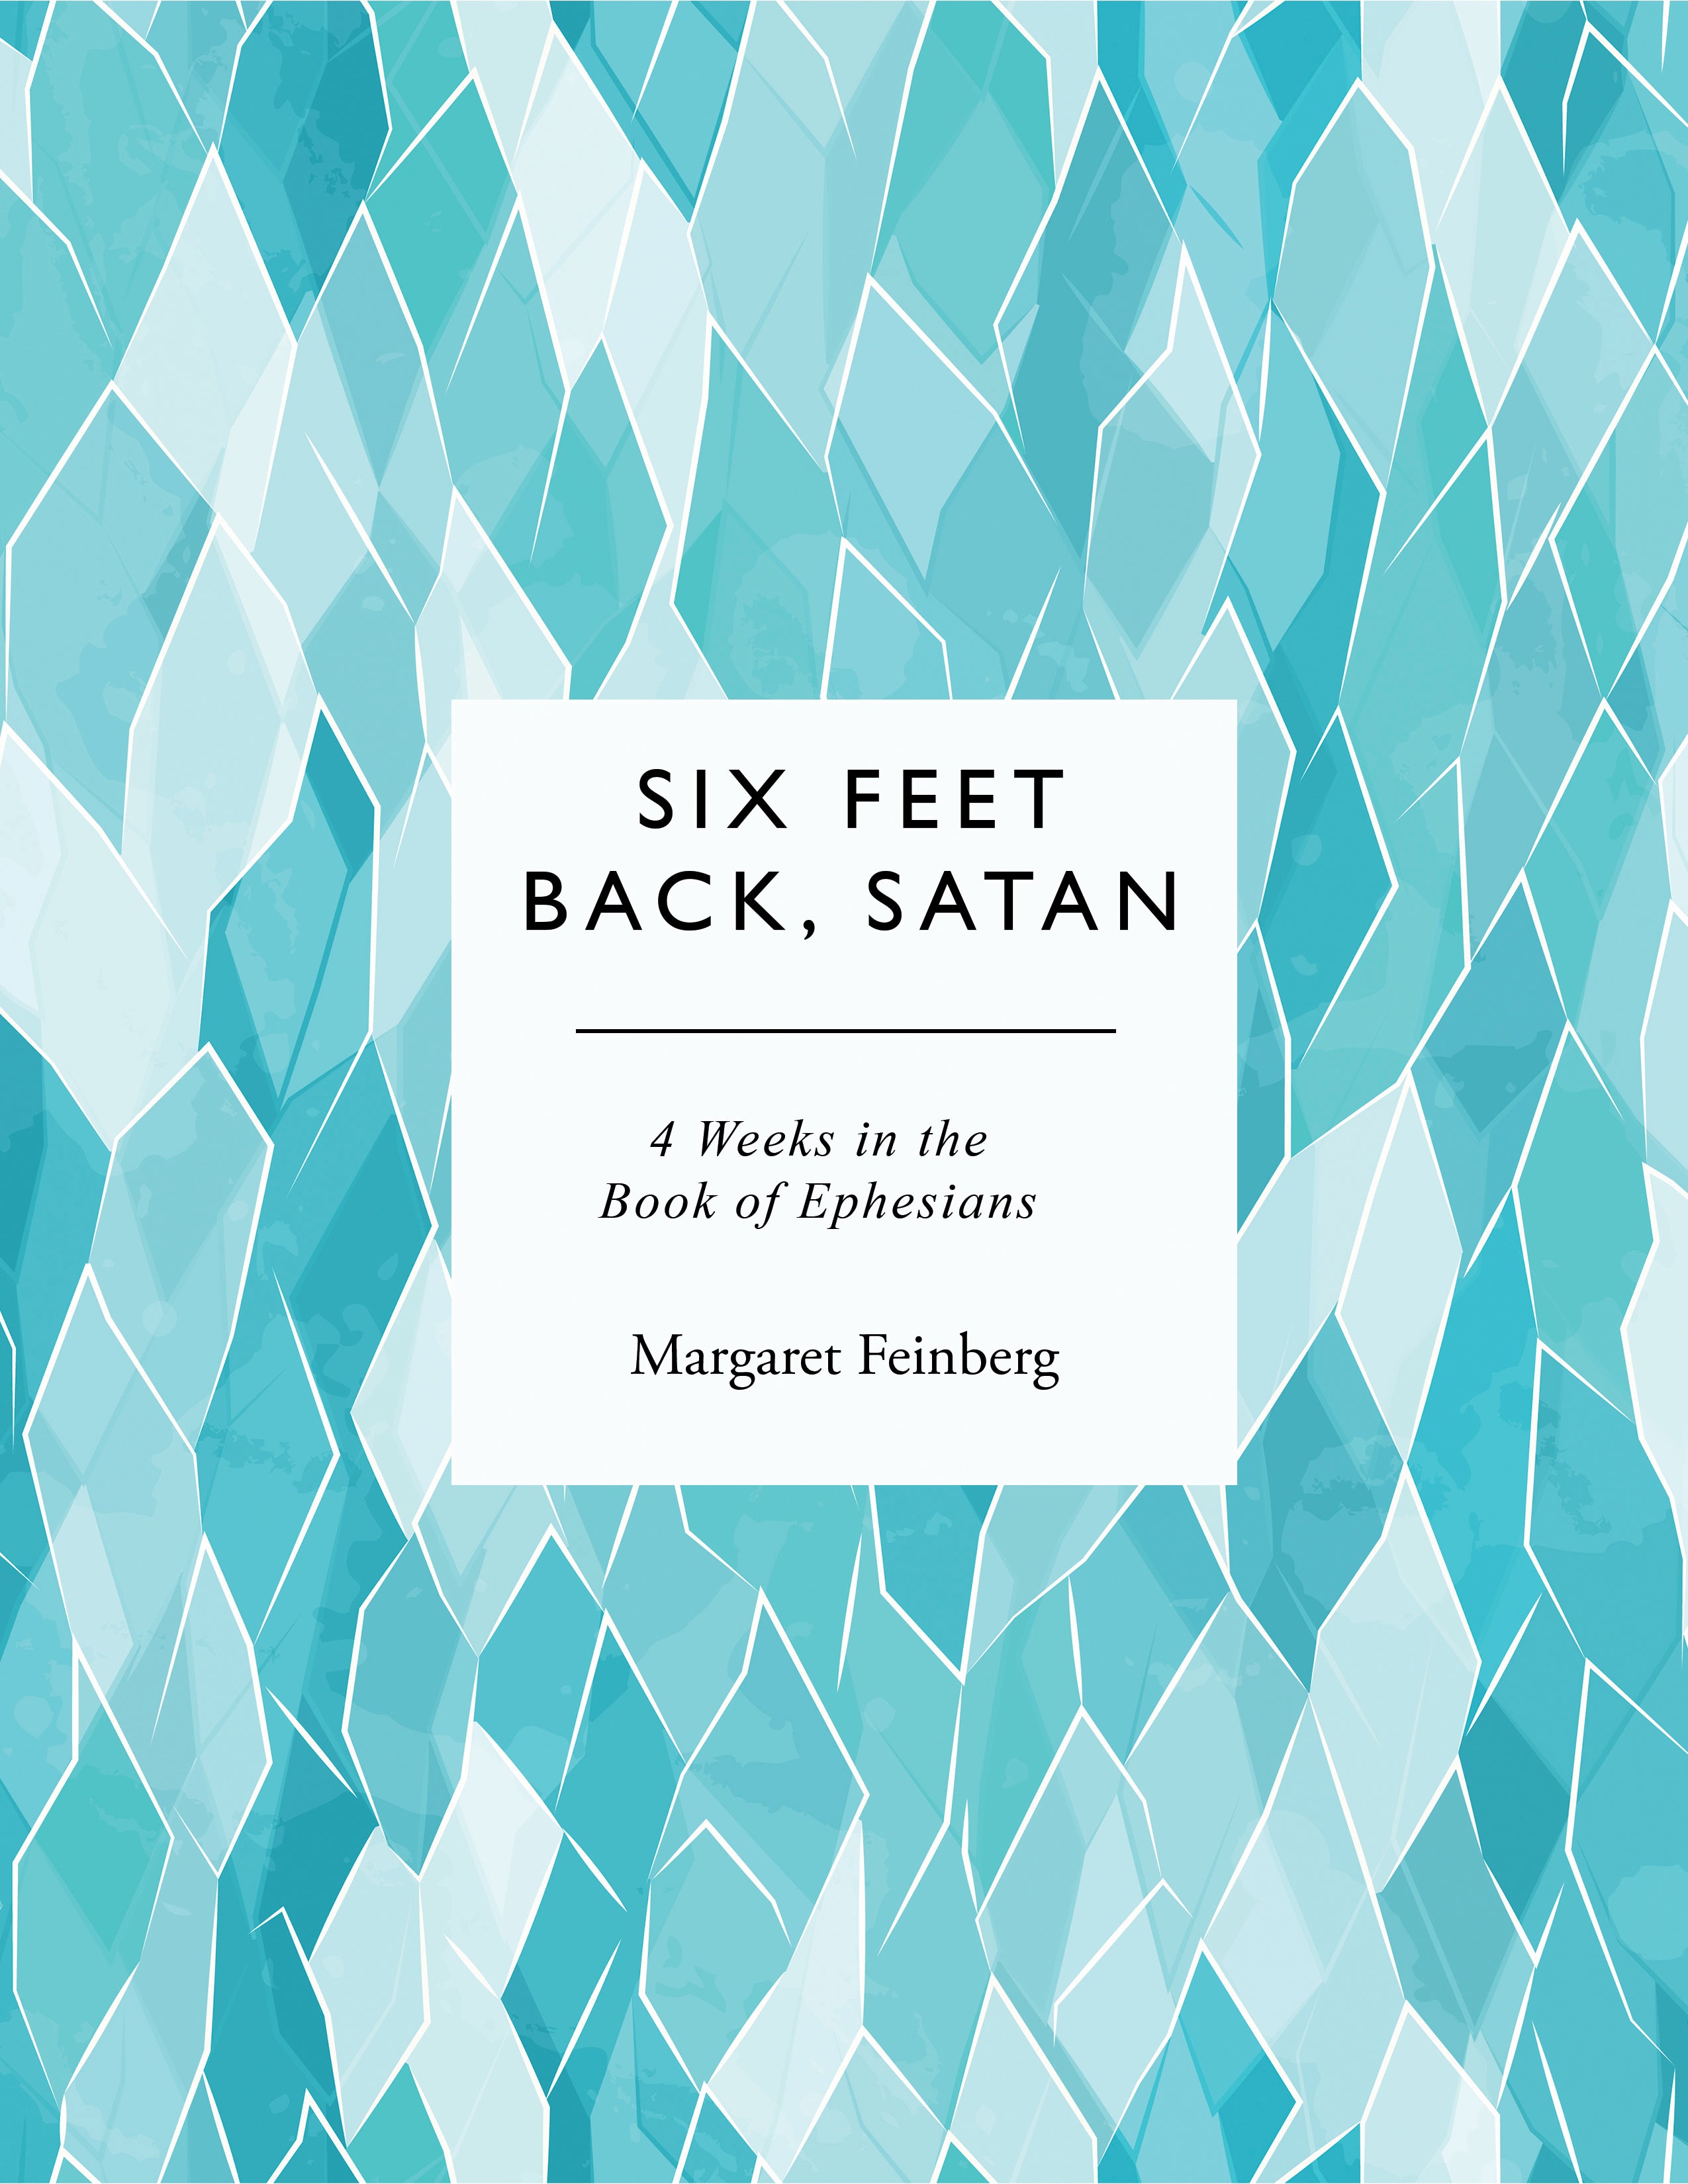 Six Feet Back, Satan: Four Weeks in the Book of Ephesians